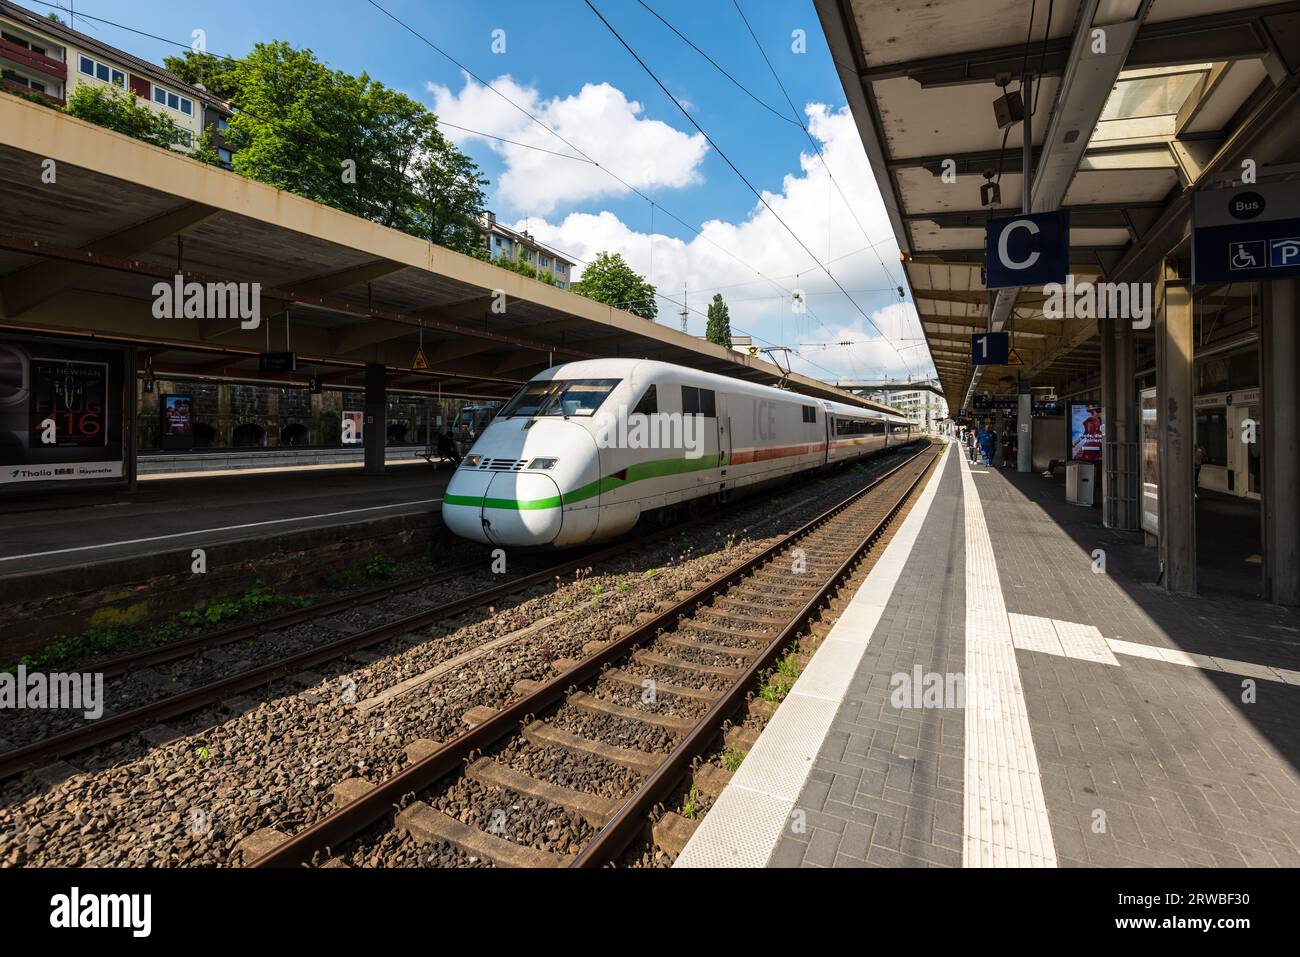 Wuppertal, Germany - June 2, 2022: Deutsche Bahn's high-speed ICE train stopping at platform at the railway station in Wuppertal, North Rhine-Westphal Stock Photo